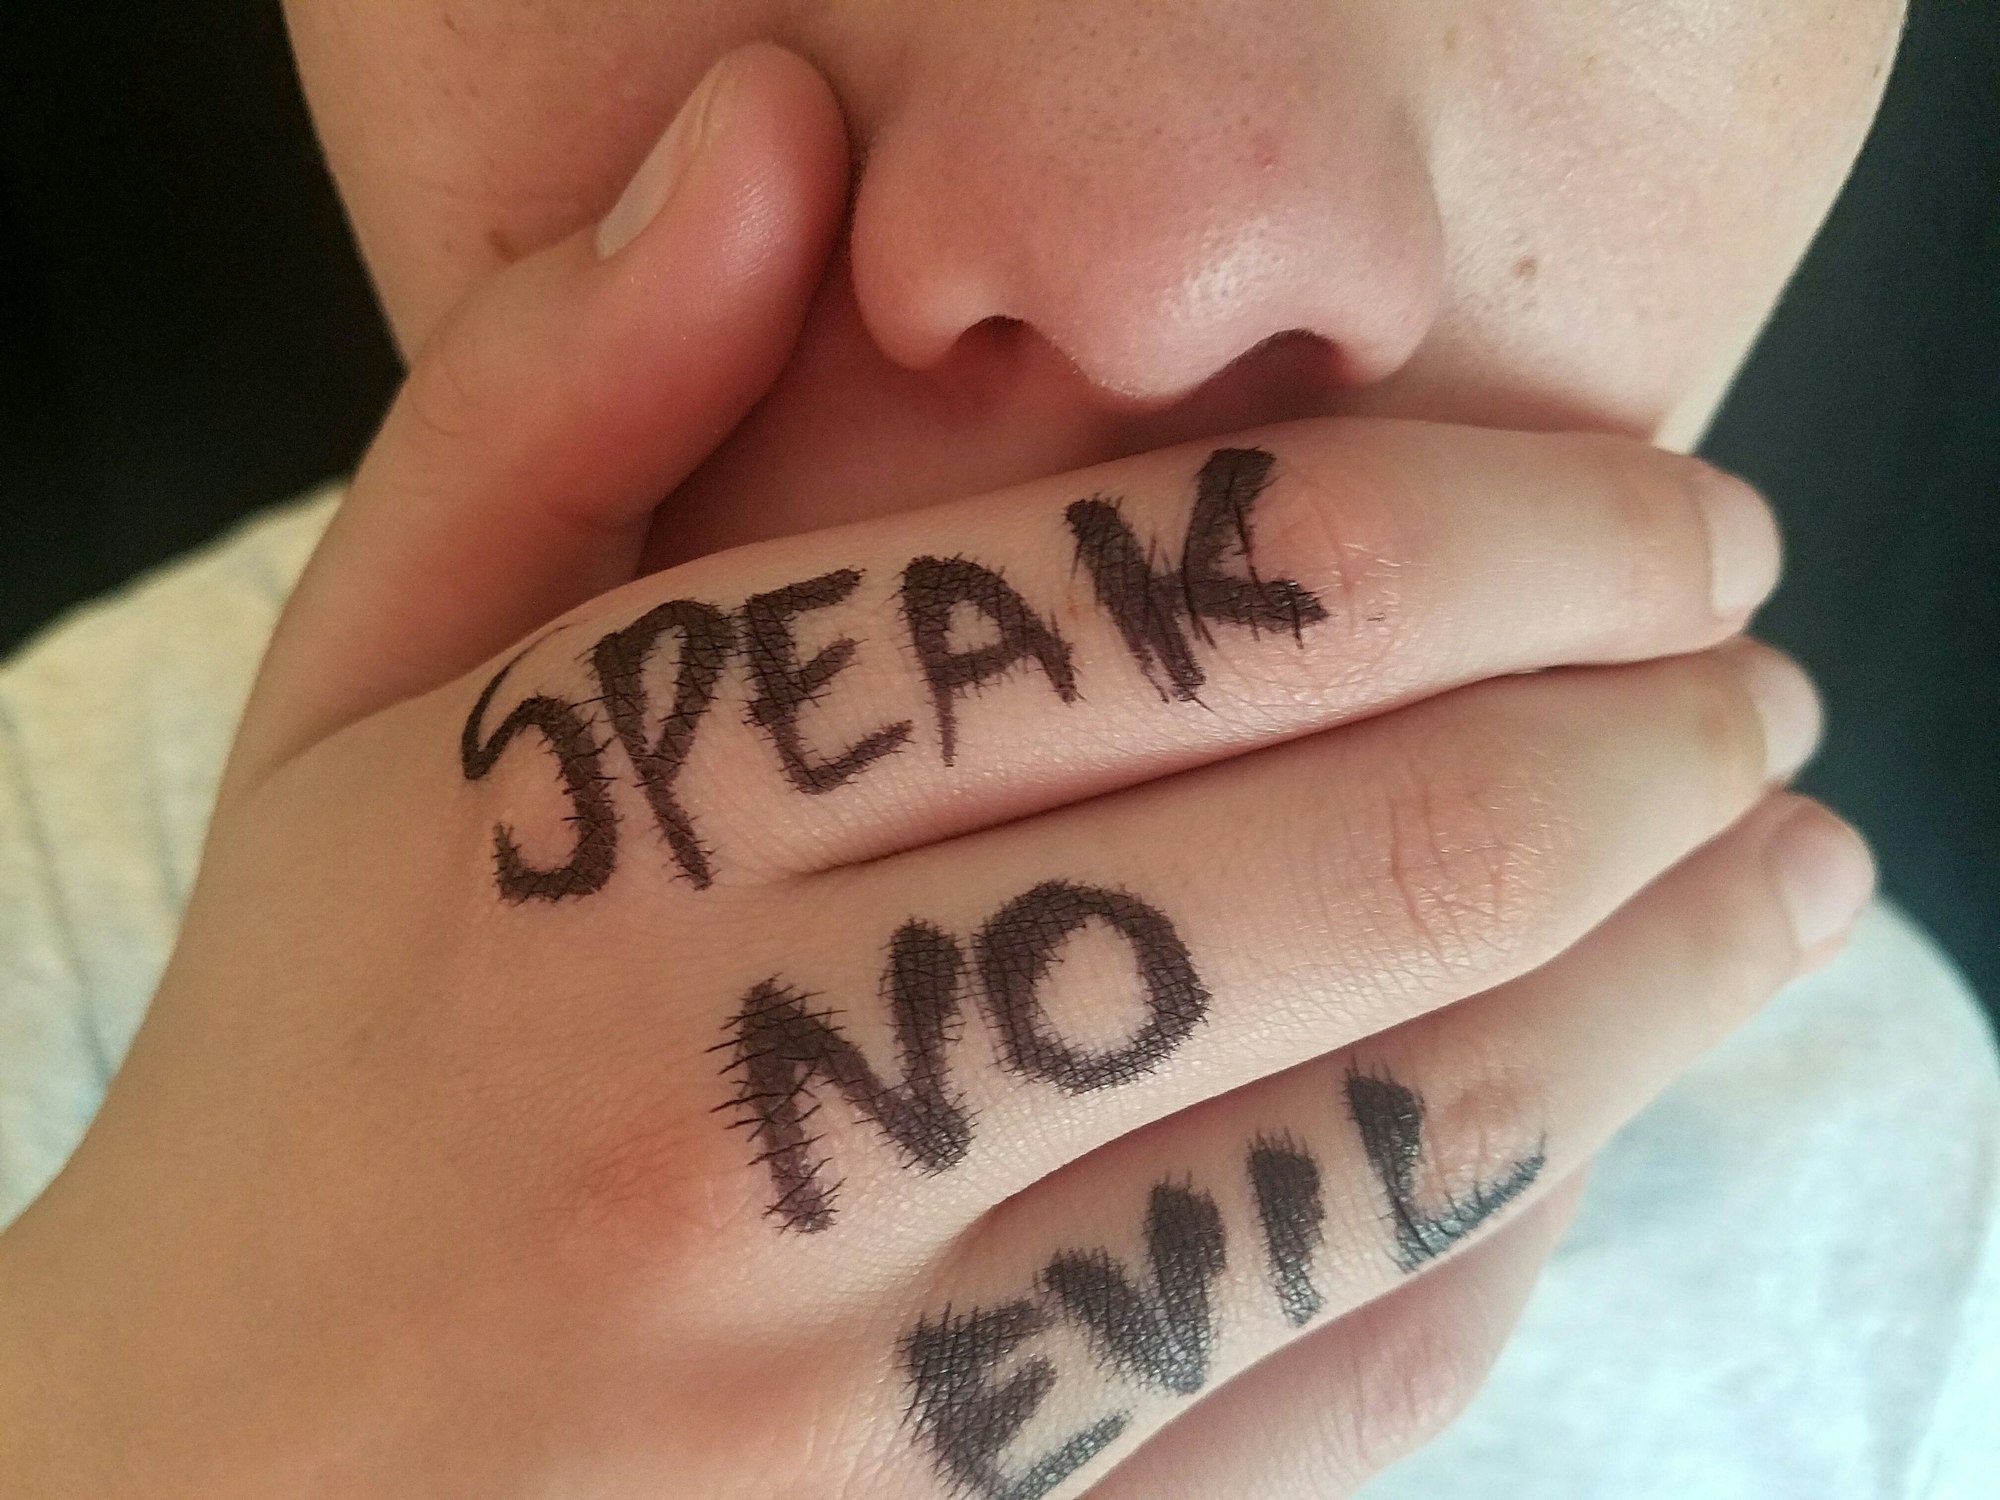 Conceptual image of hand with Speak No Evil written on fingers covers mouth.